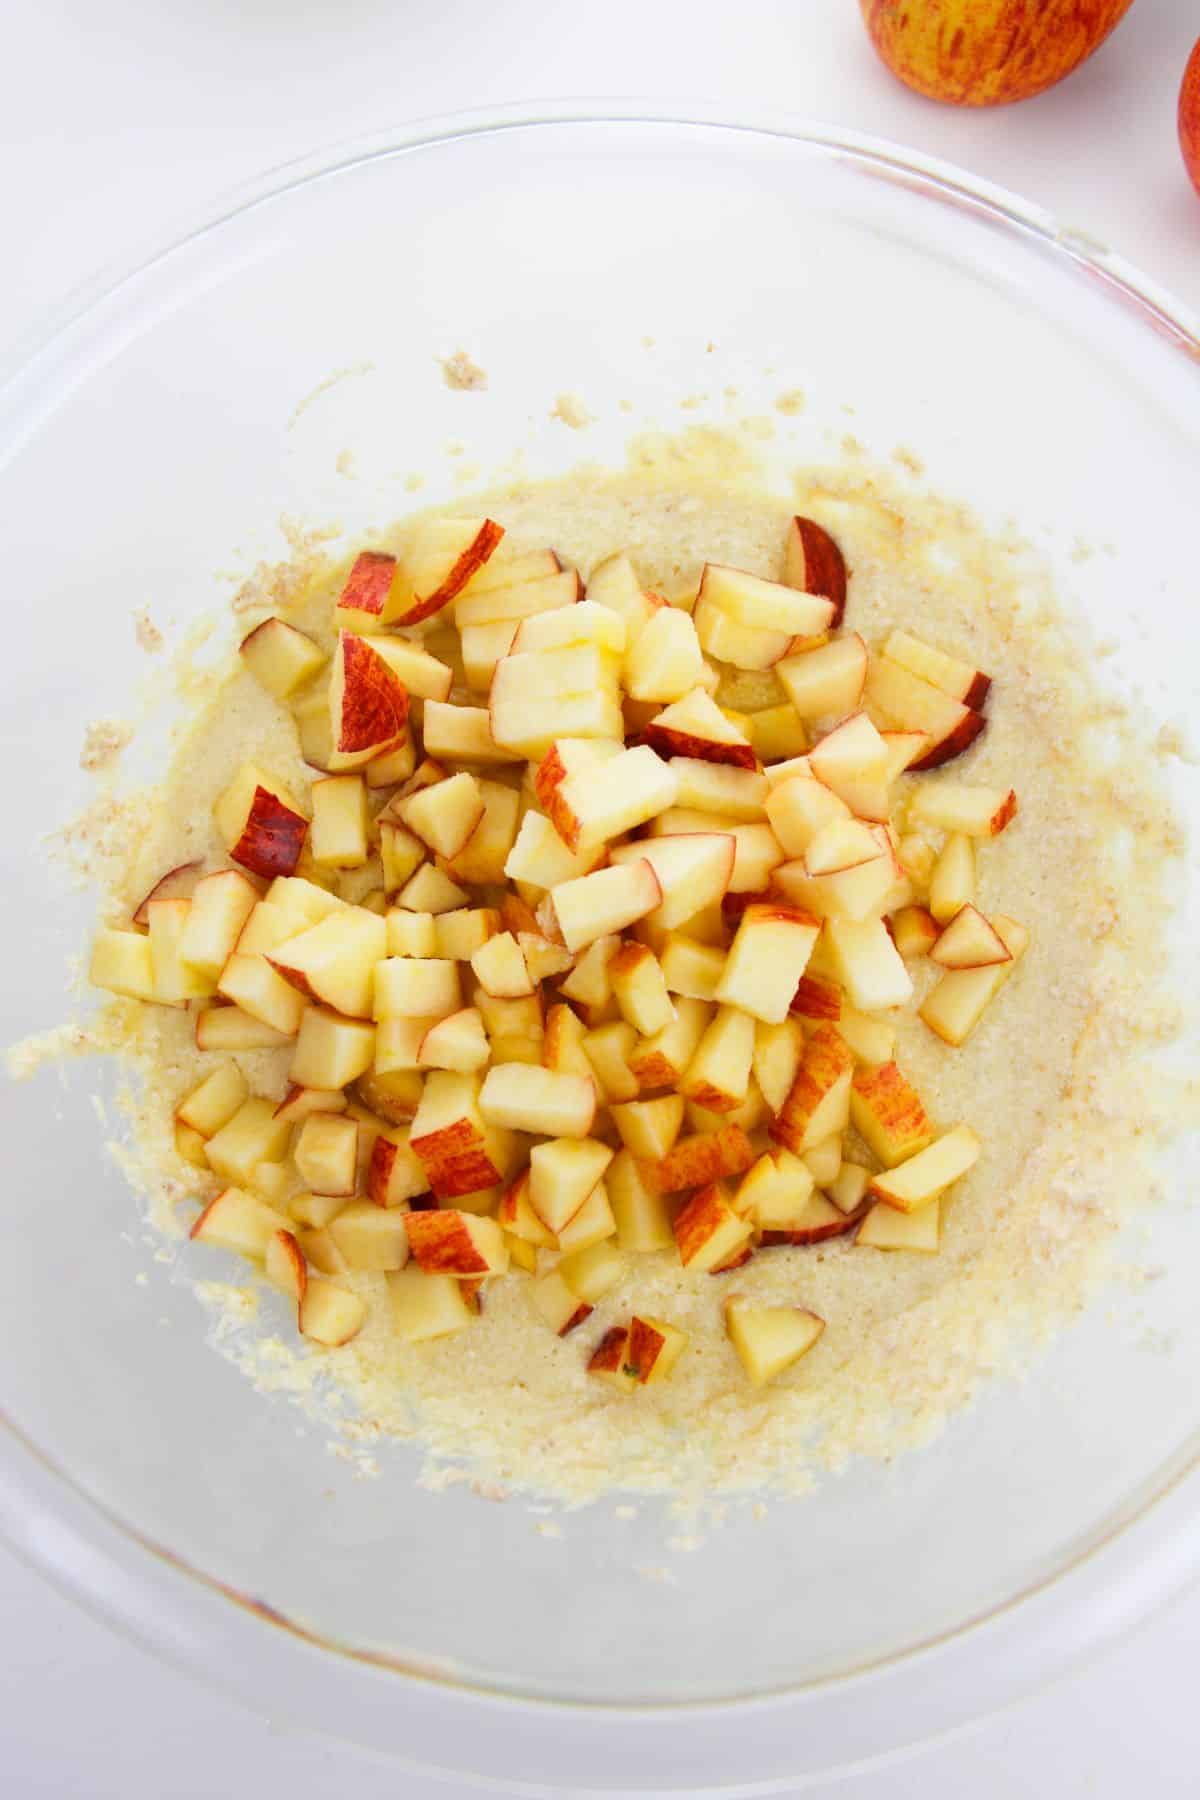 chopped apples are added to the batter in a mixing bowl.